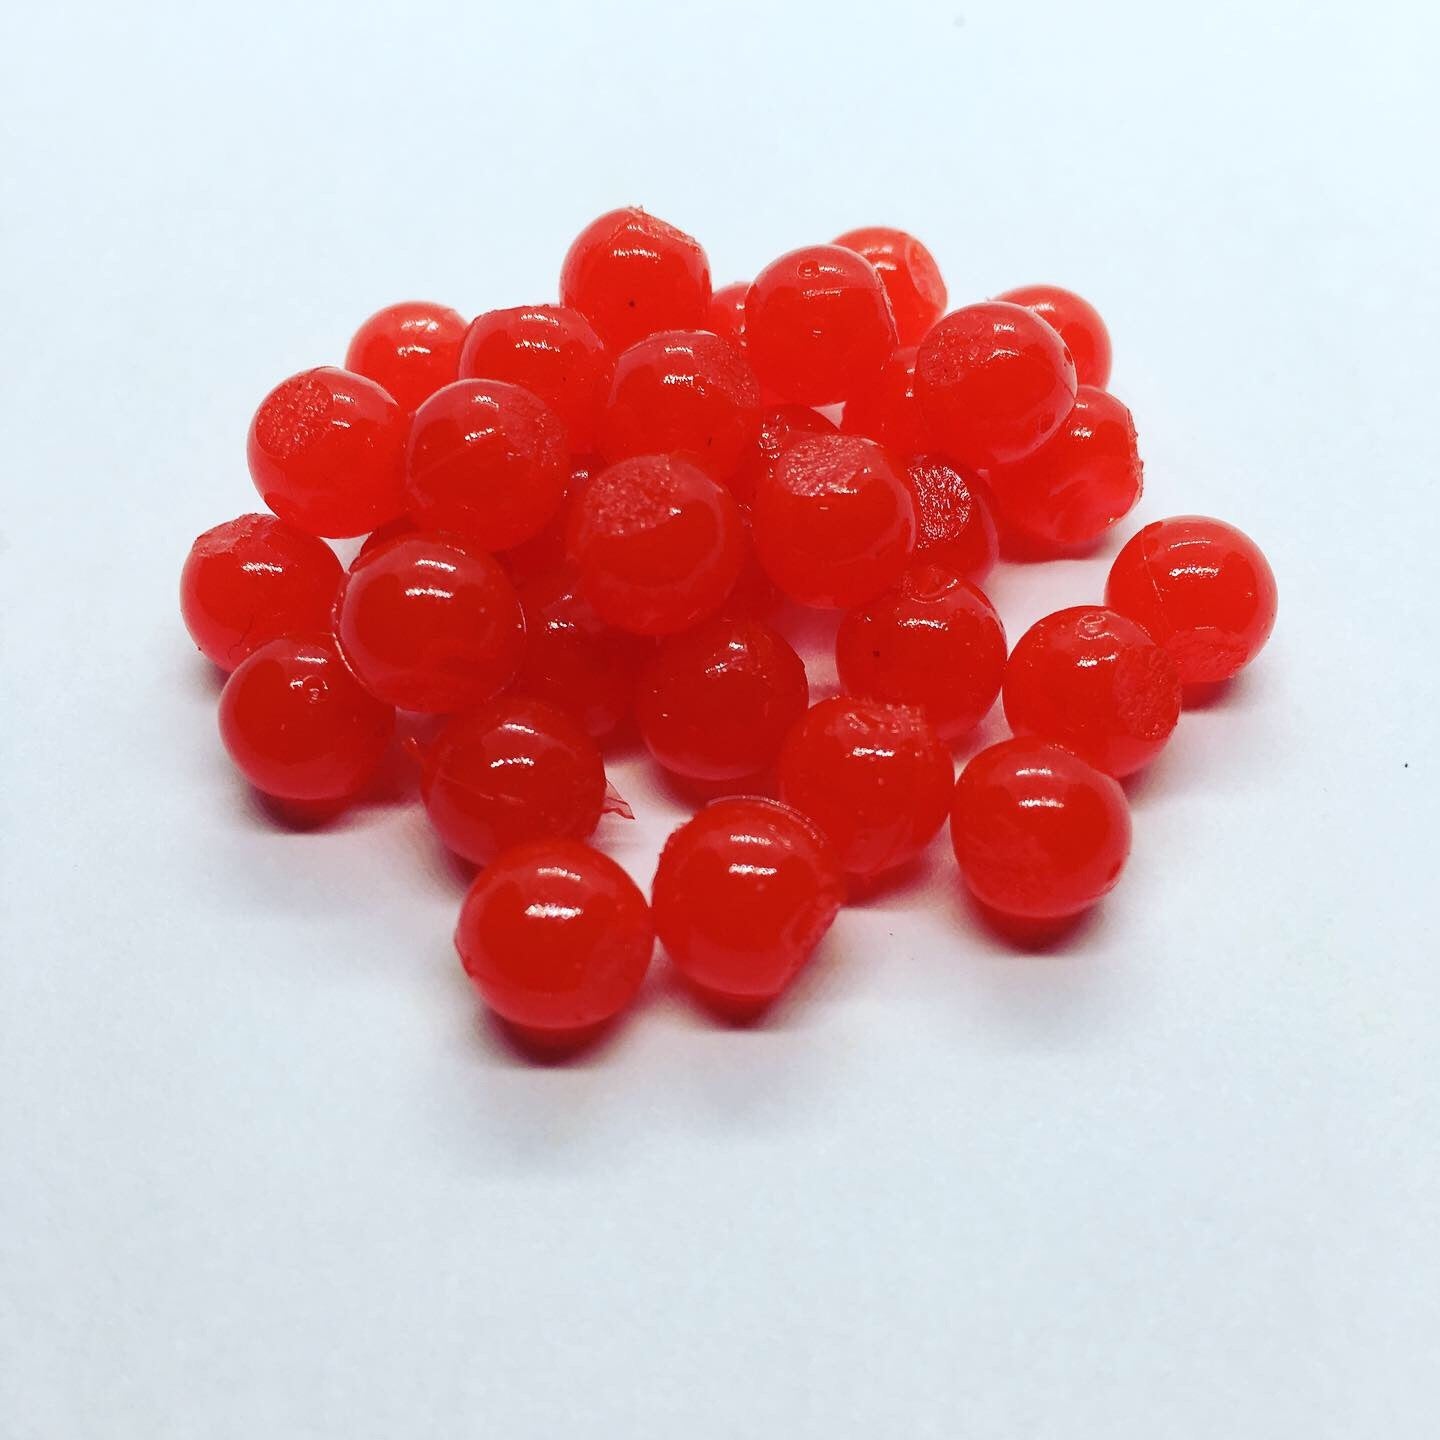 Salmon Eggs: Red